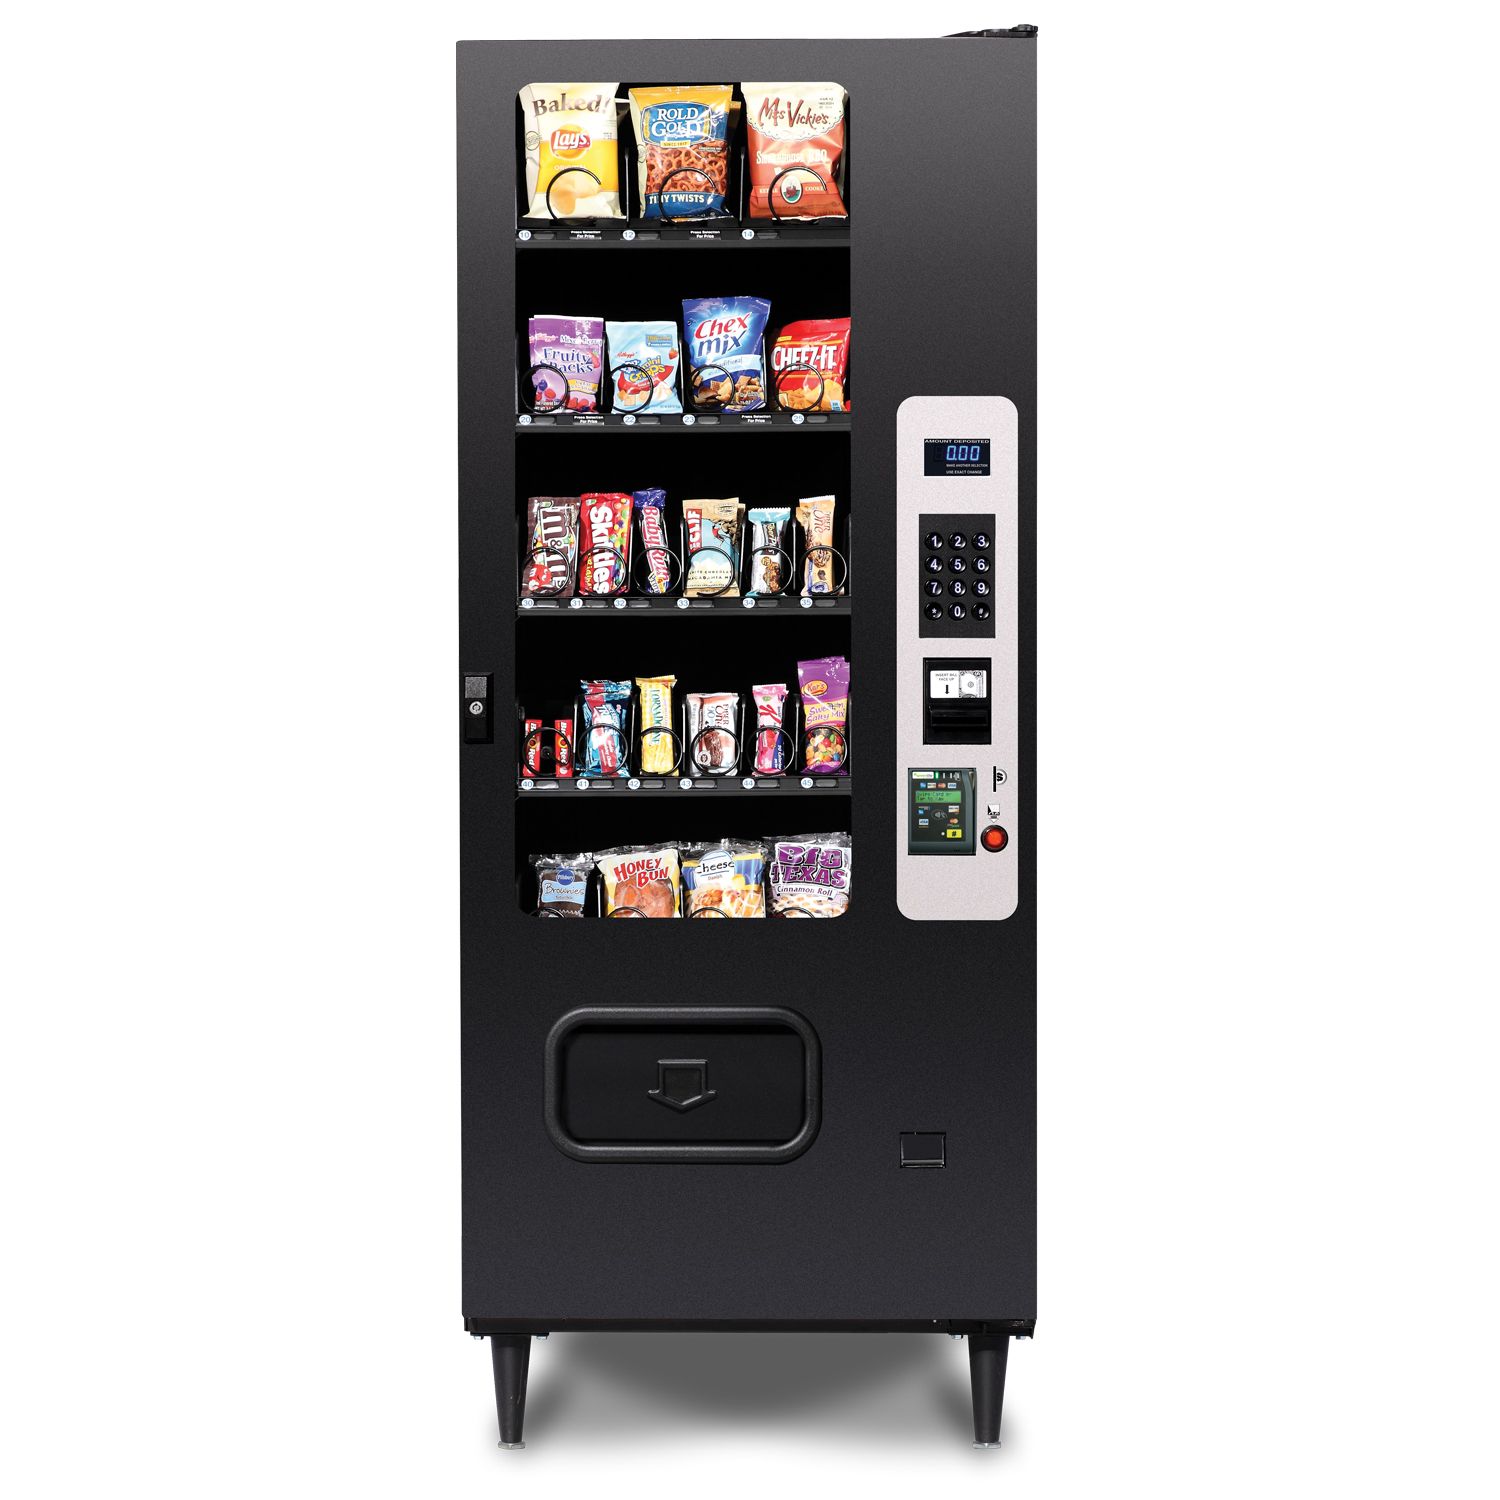 Selectivend SEL23 Snack Vending Machine with Credit Card Reader